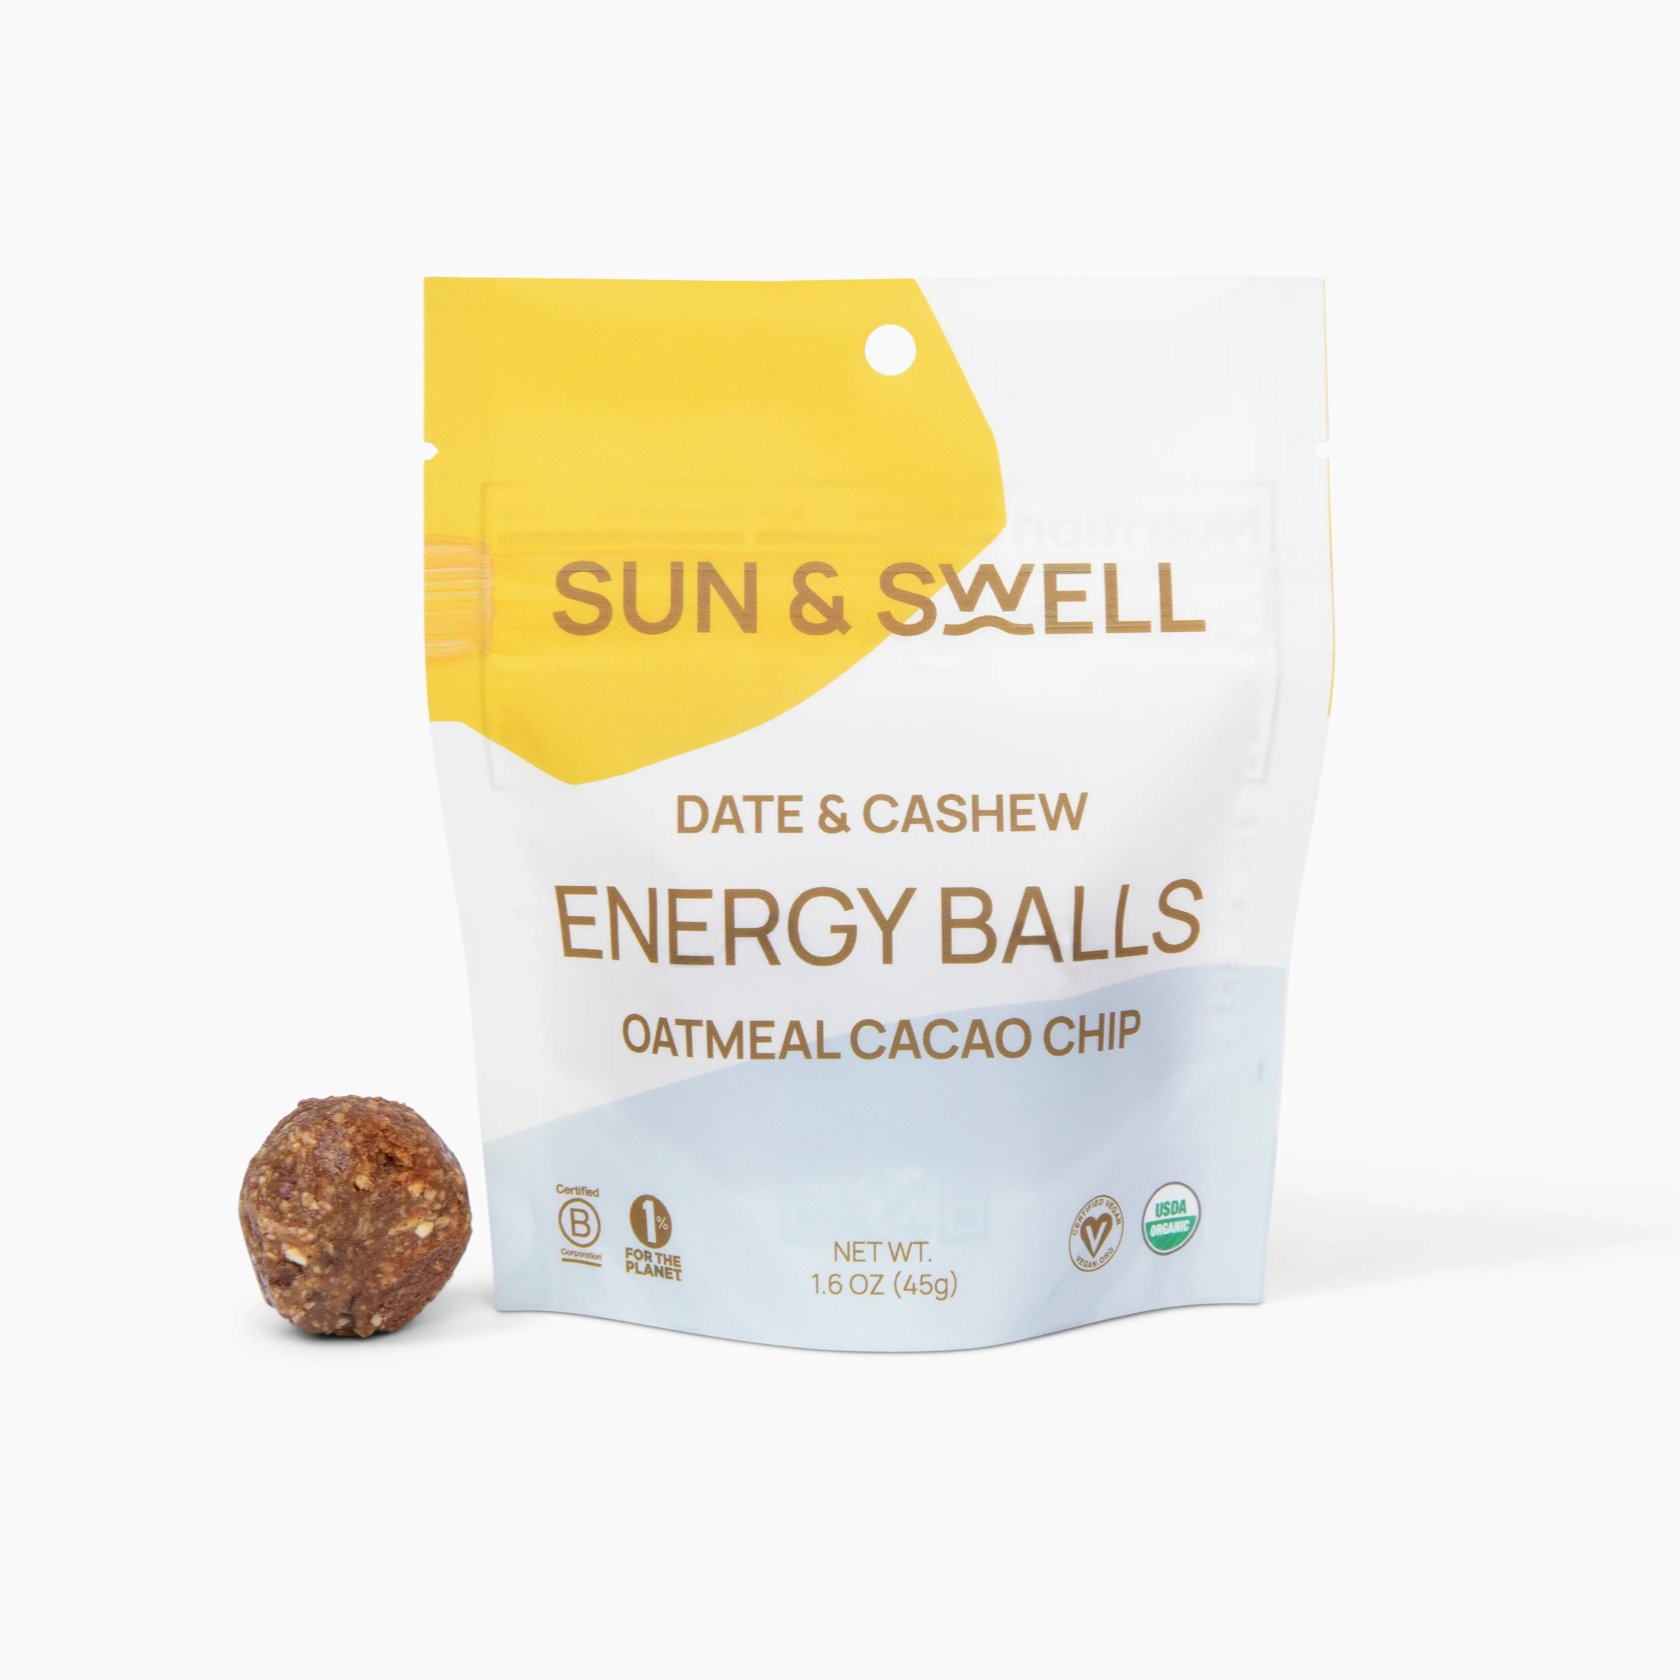 sun & swell oatmeal cacao chip energy balls packaging with a ball to the left of It